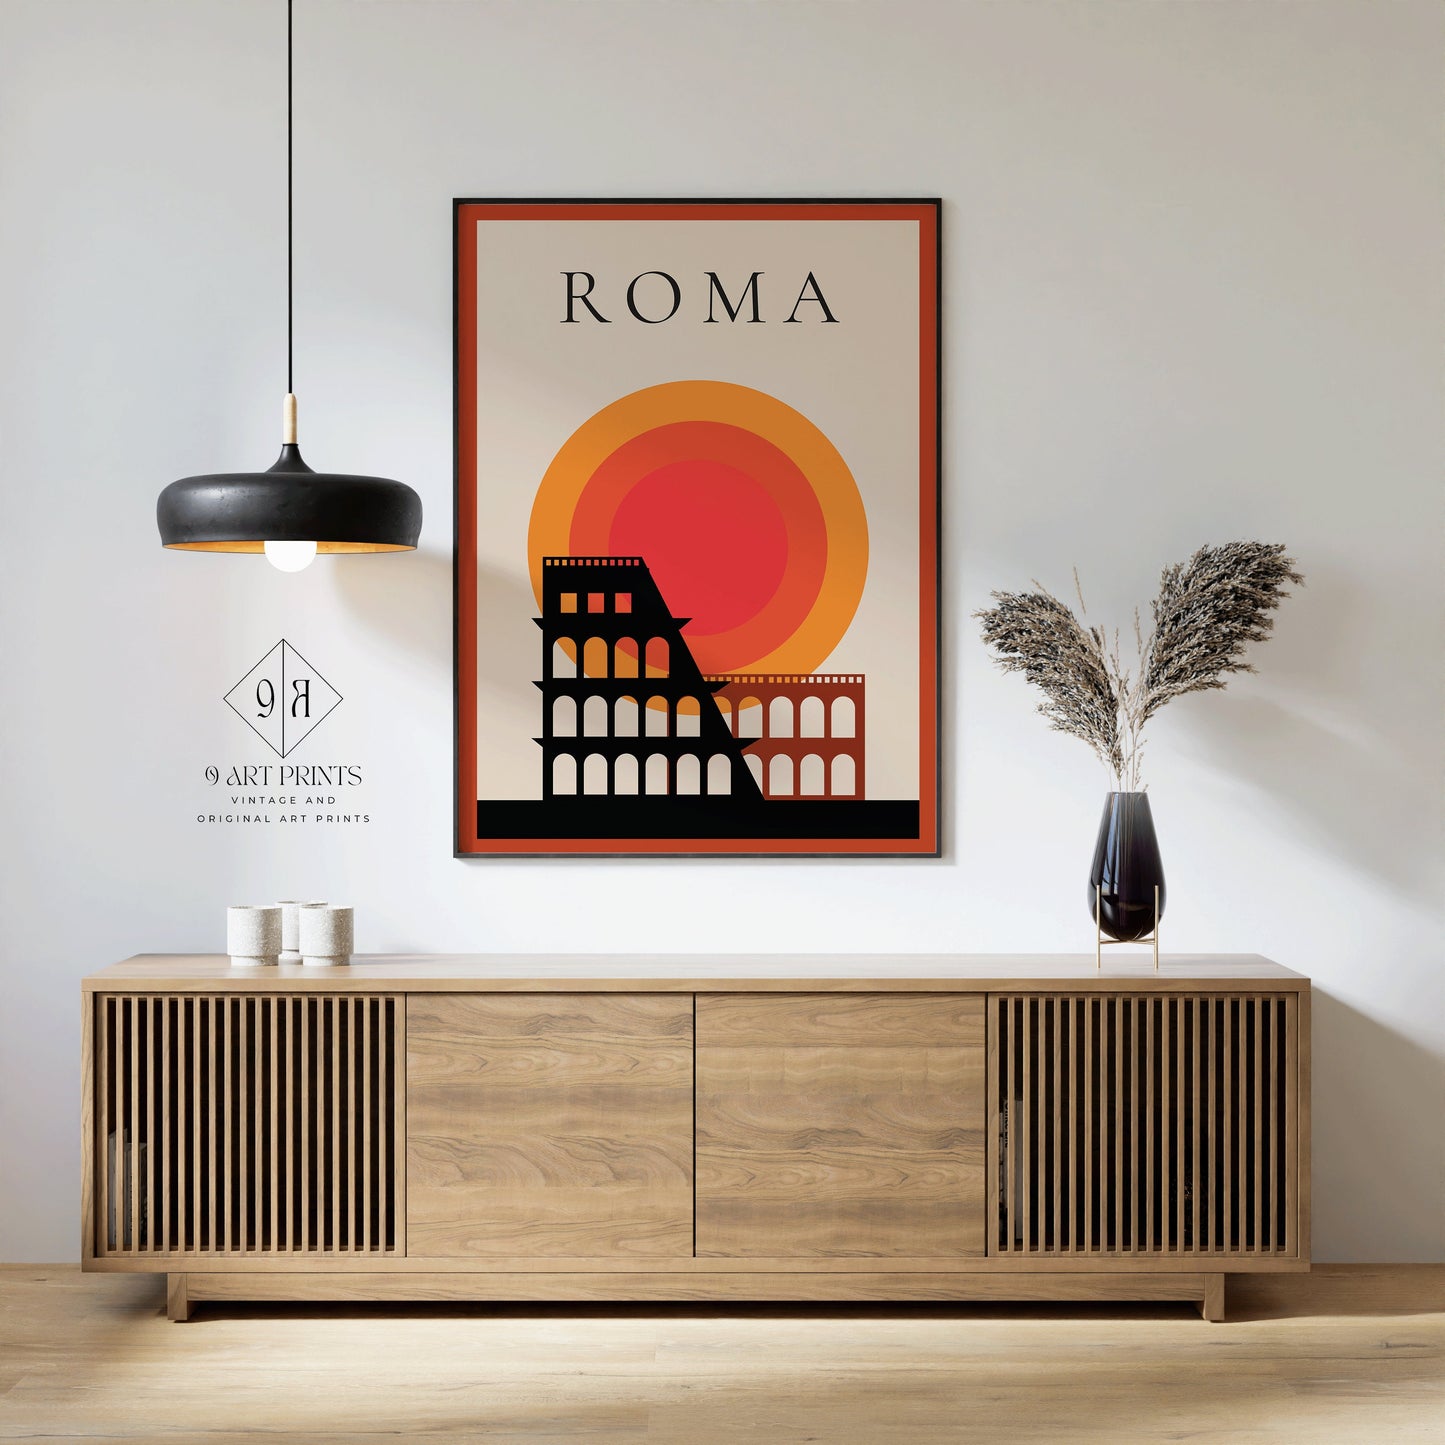 Framed Vintage Travel Poster Rome Italy Retro Art Print Exhibition Poster Portrait Modern Gallery Framed Ready to Hang Home Office Decor